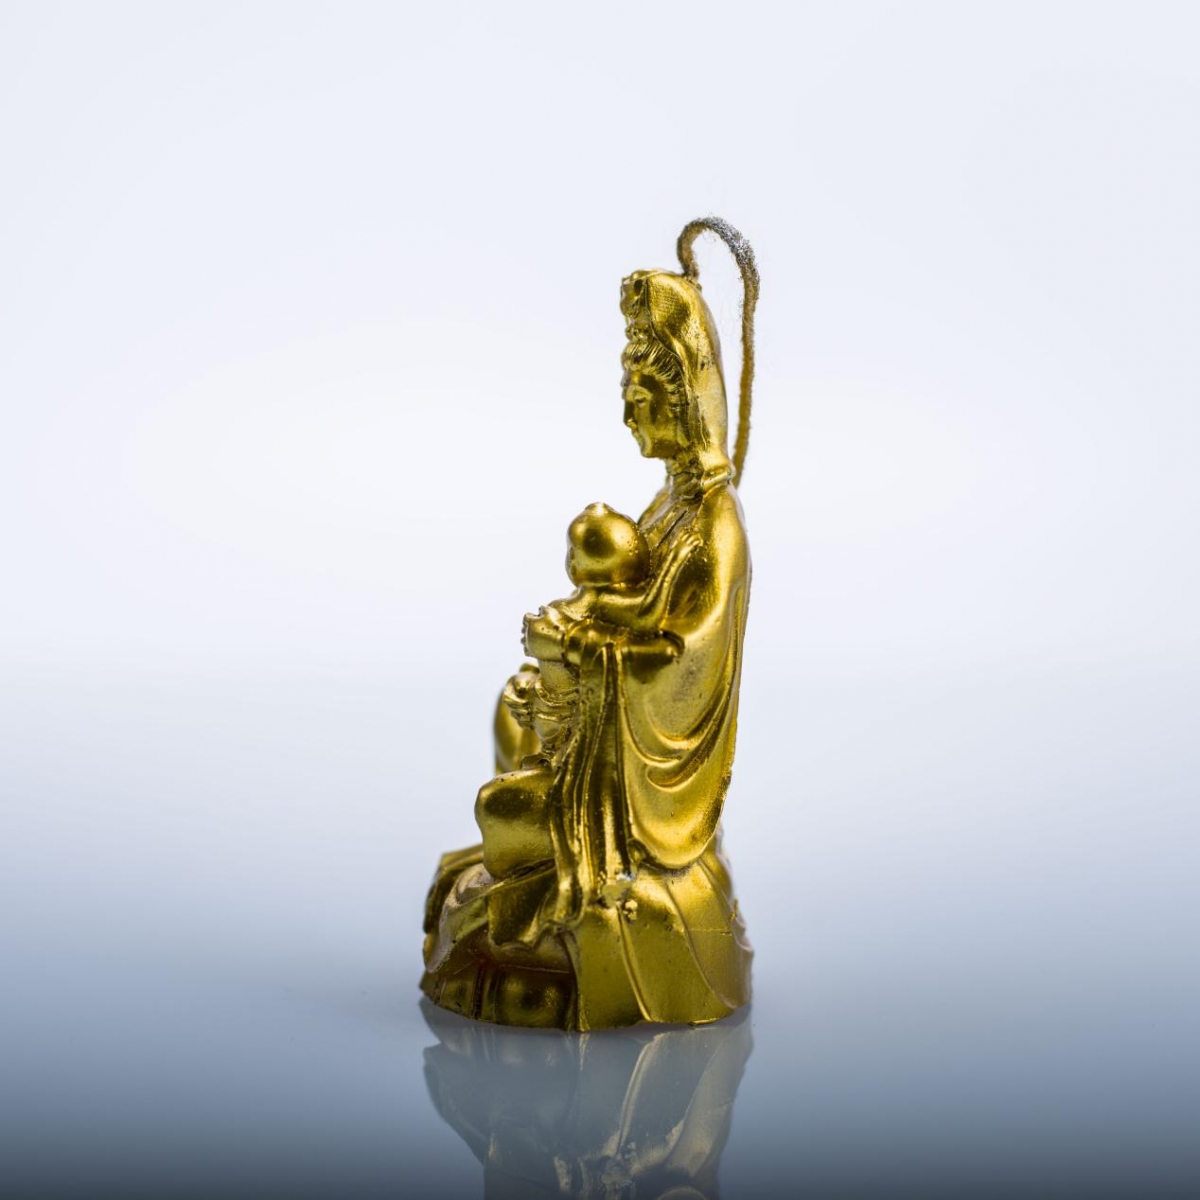 Buddha Candles：Luxury Gold ,Sculpture Art ,Beeswax ,Kwan Yin,Kuan Yin,Buddhism,Religious,China Factory, Price-HOWCANDLE-Candles,Scented Candles,Aromatherapy Candles,Soy Candles,Vegan Candles,Jar Candles,Pillar Candles,Candle Gift Sets,Essential Oils,Reed Diffuser,Candle Holder,